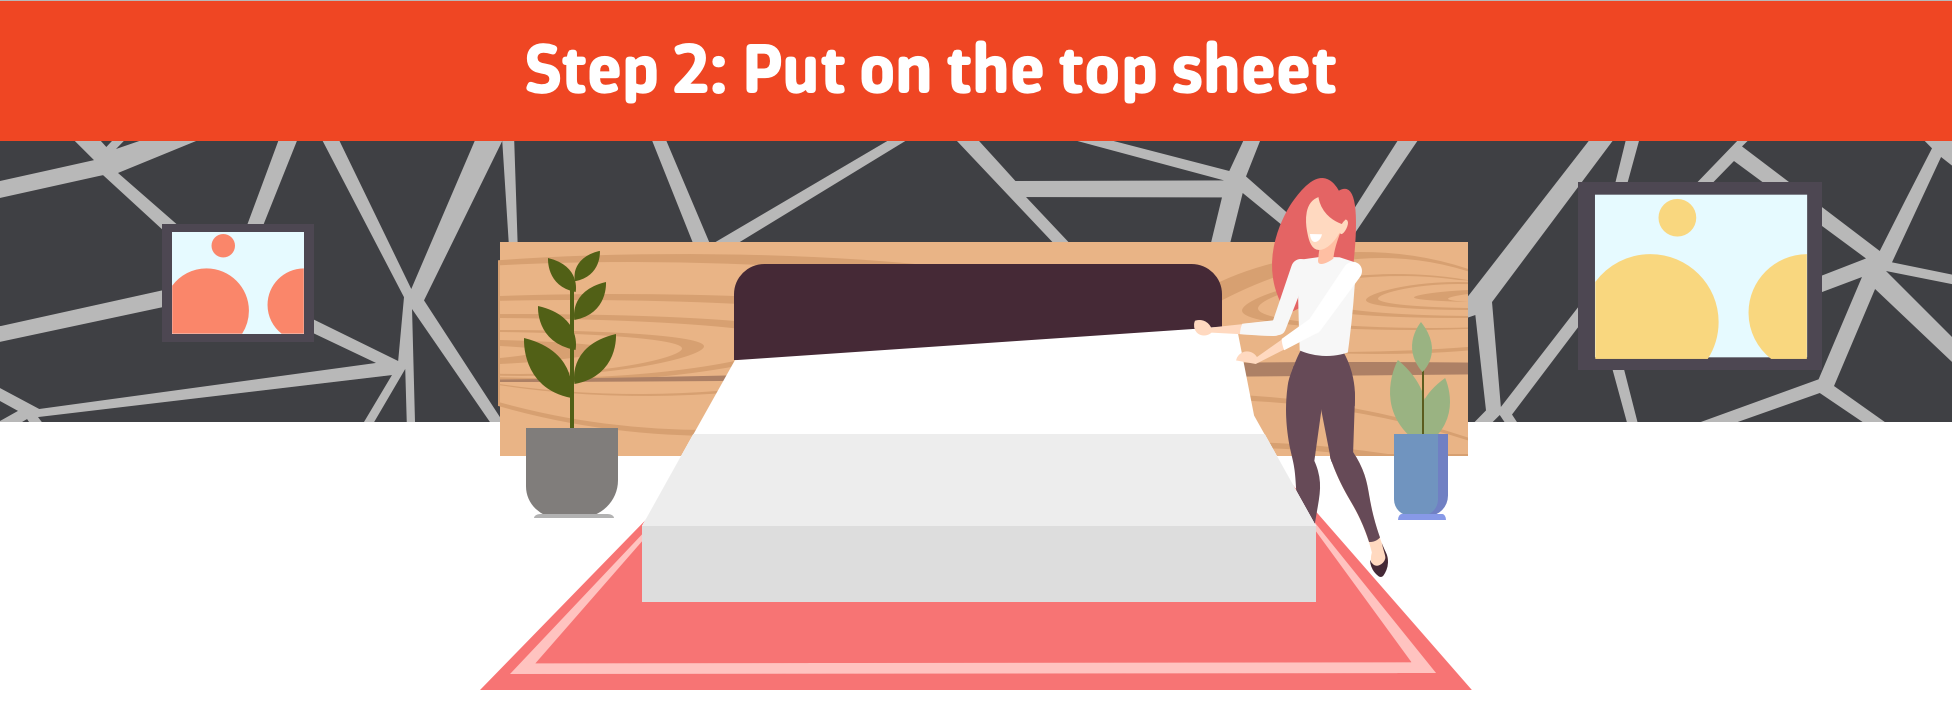 Put on the top sheet